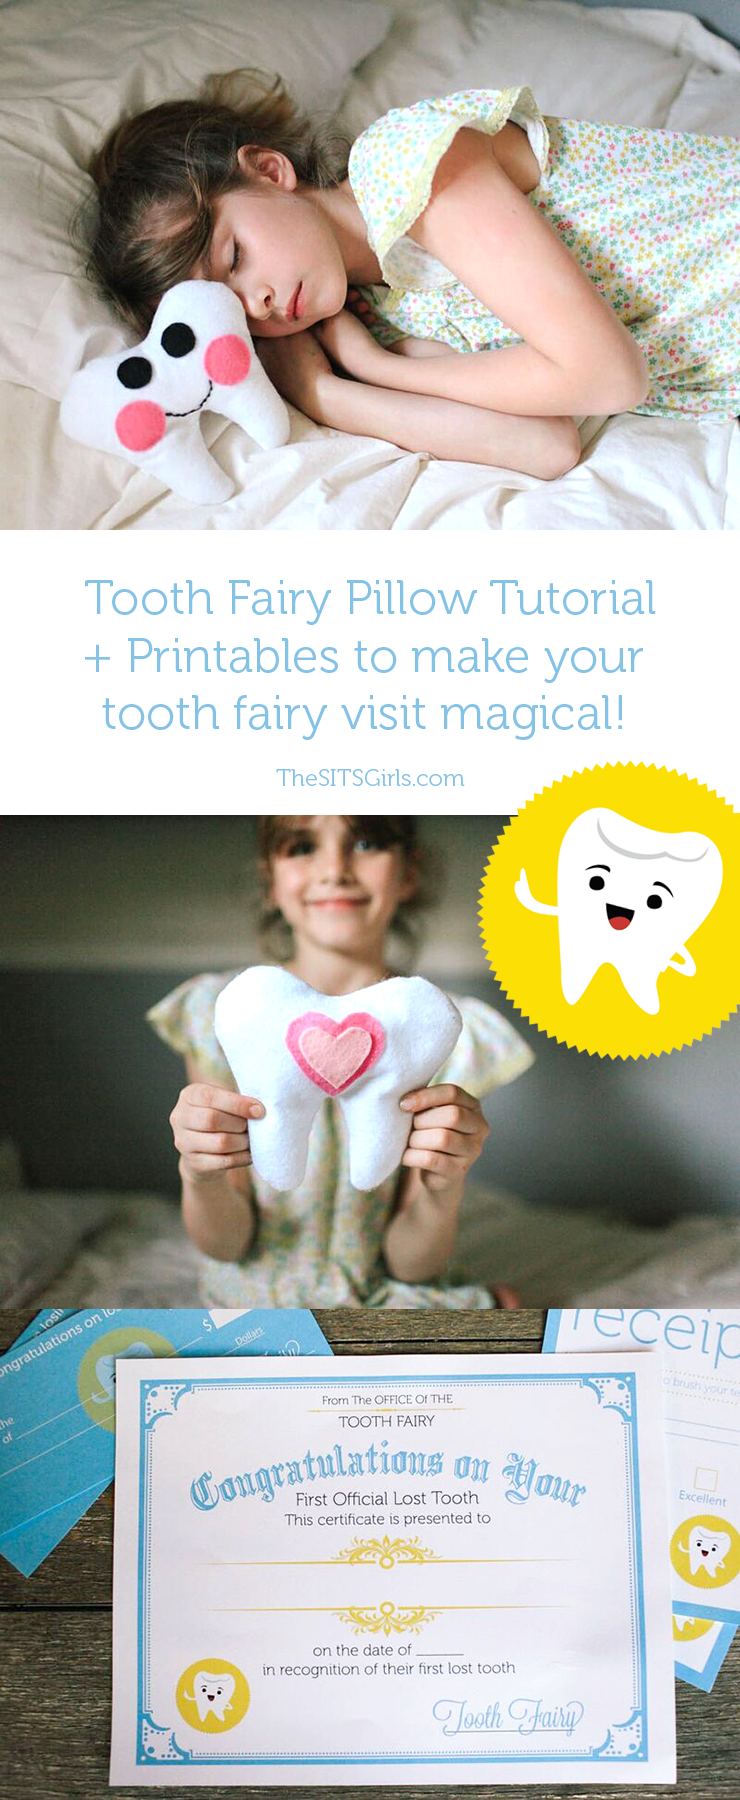 Make the Tooth Fairy visit special with this cute DIY Tooth Fairy pillow and super cute Tooth Fairy printables - including a letter from the fairy, tooth receipt, and even an official Tooth Fairy Check for those nights when parents weren't prepared for a lost tooth. 